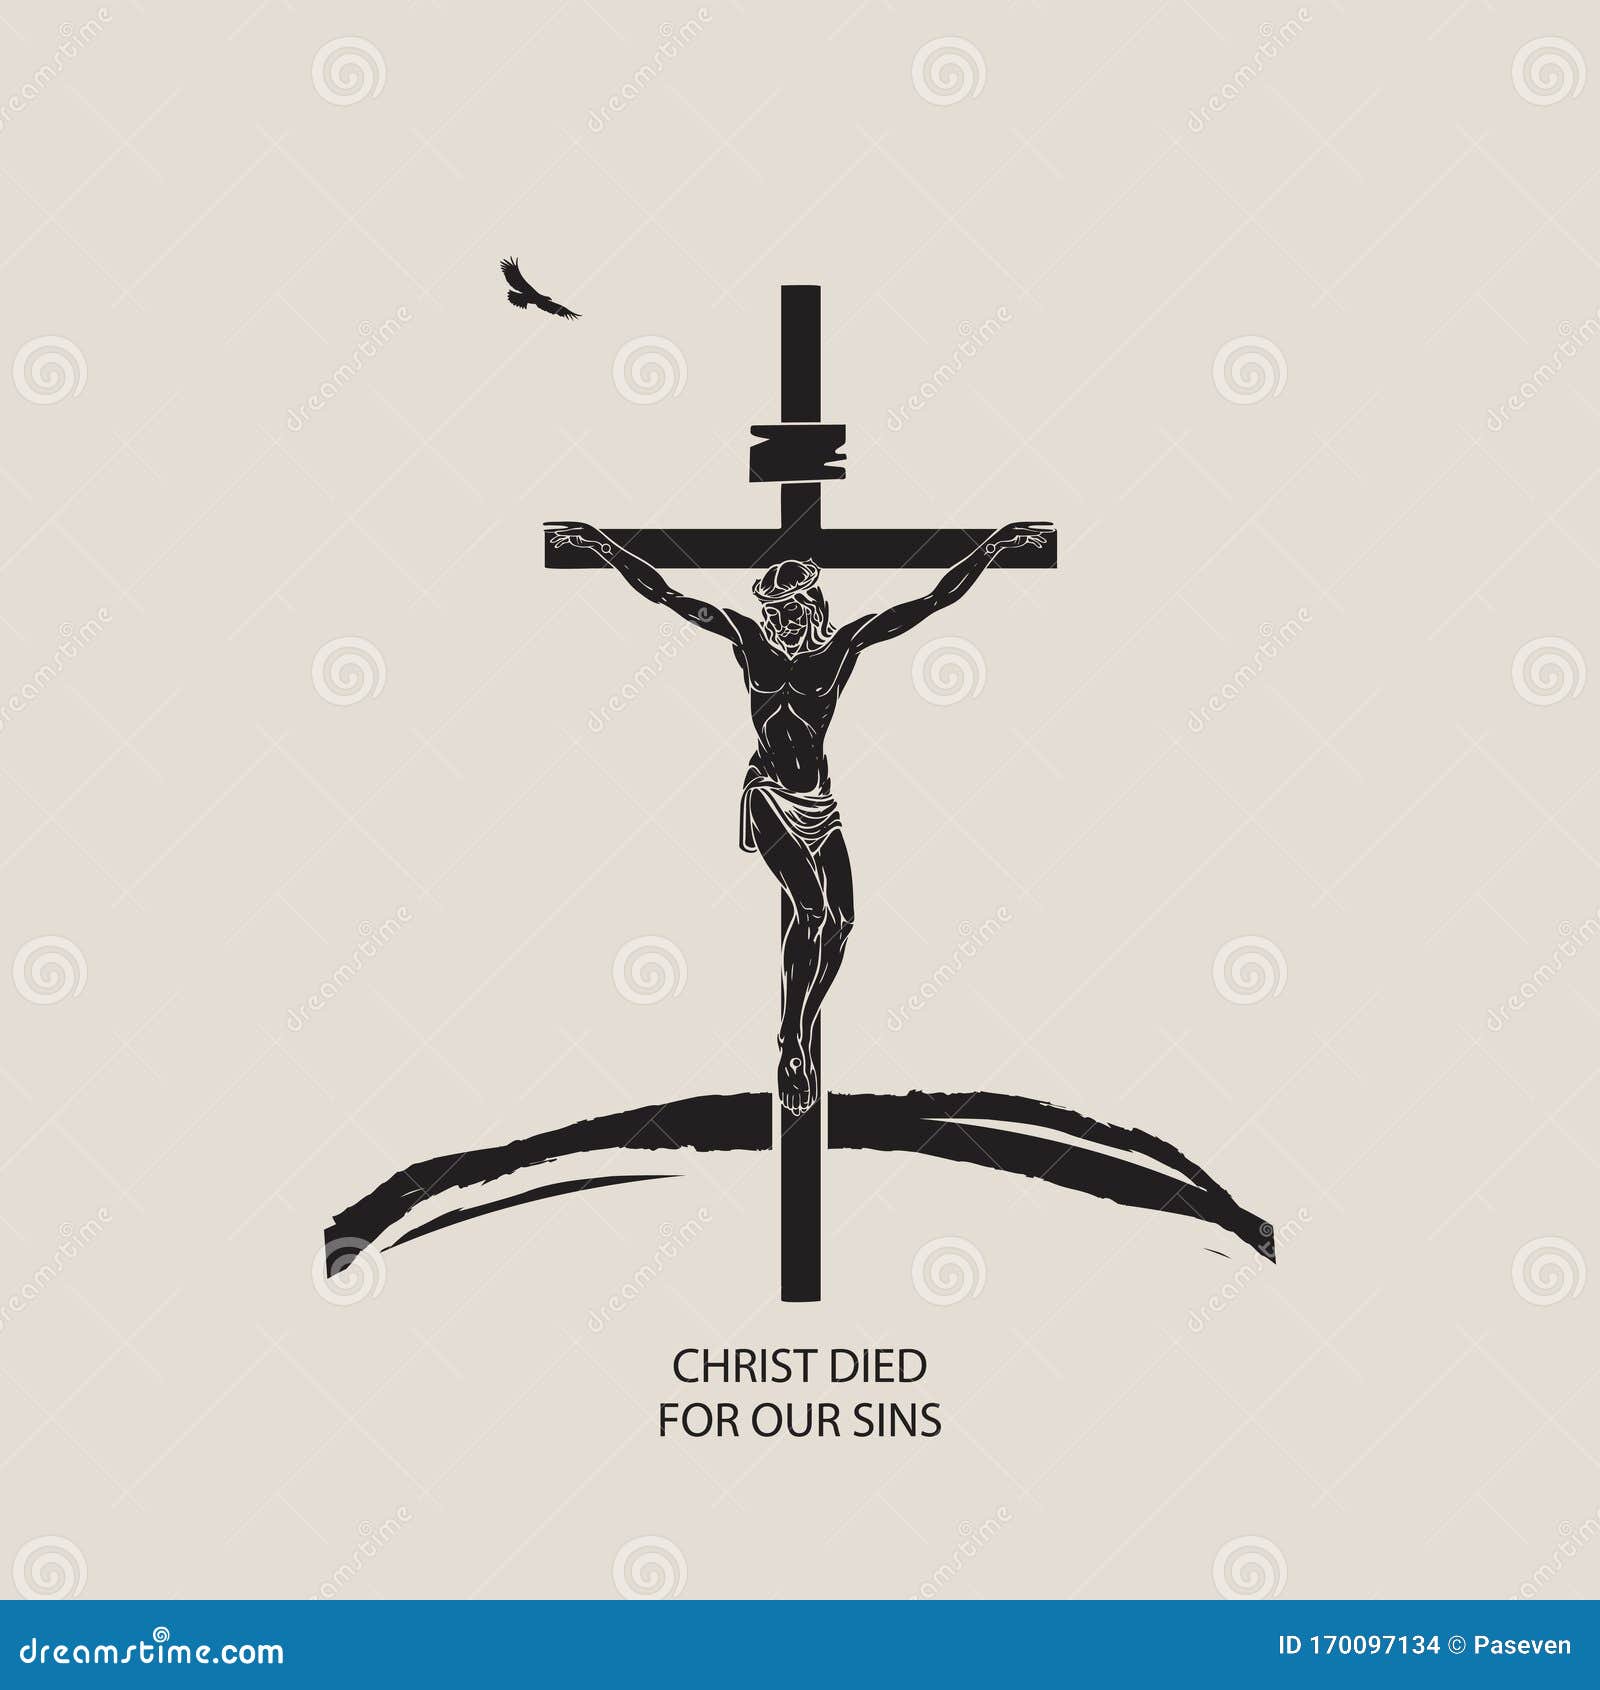 Banner With Crucified Jesus In A Crown Of Thorns Cartoon Vector ...